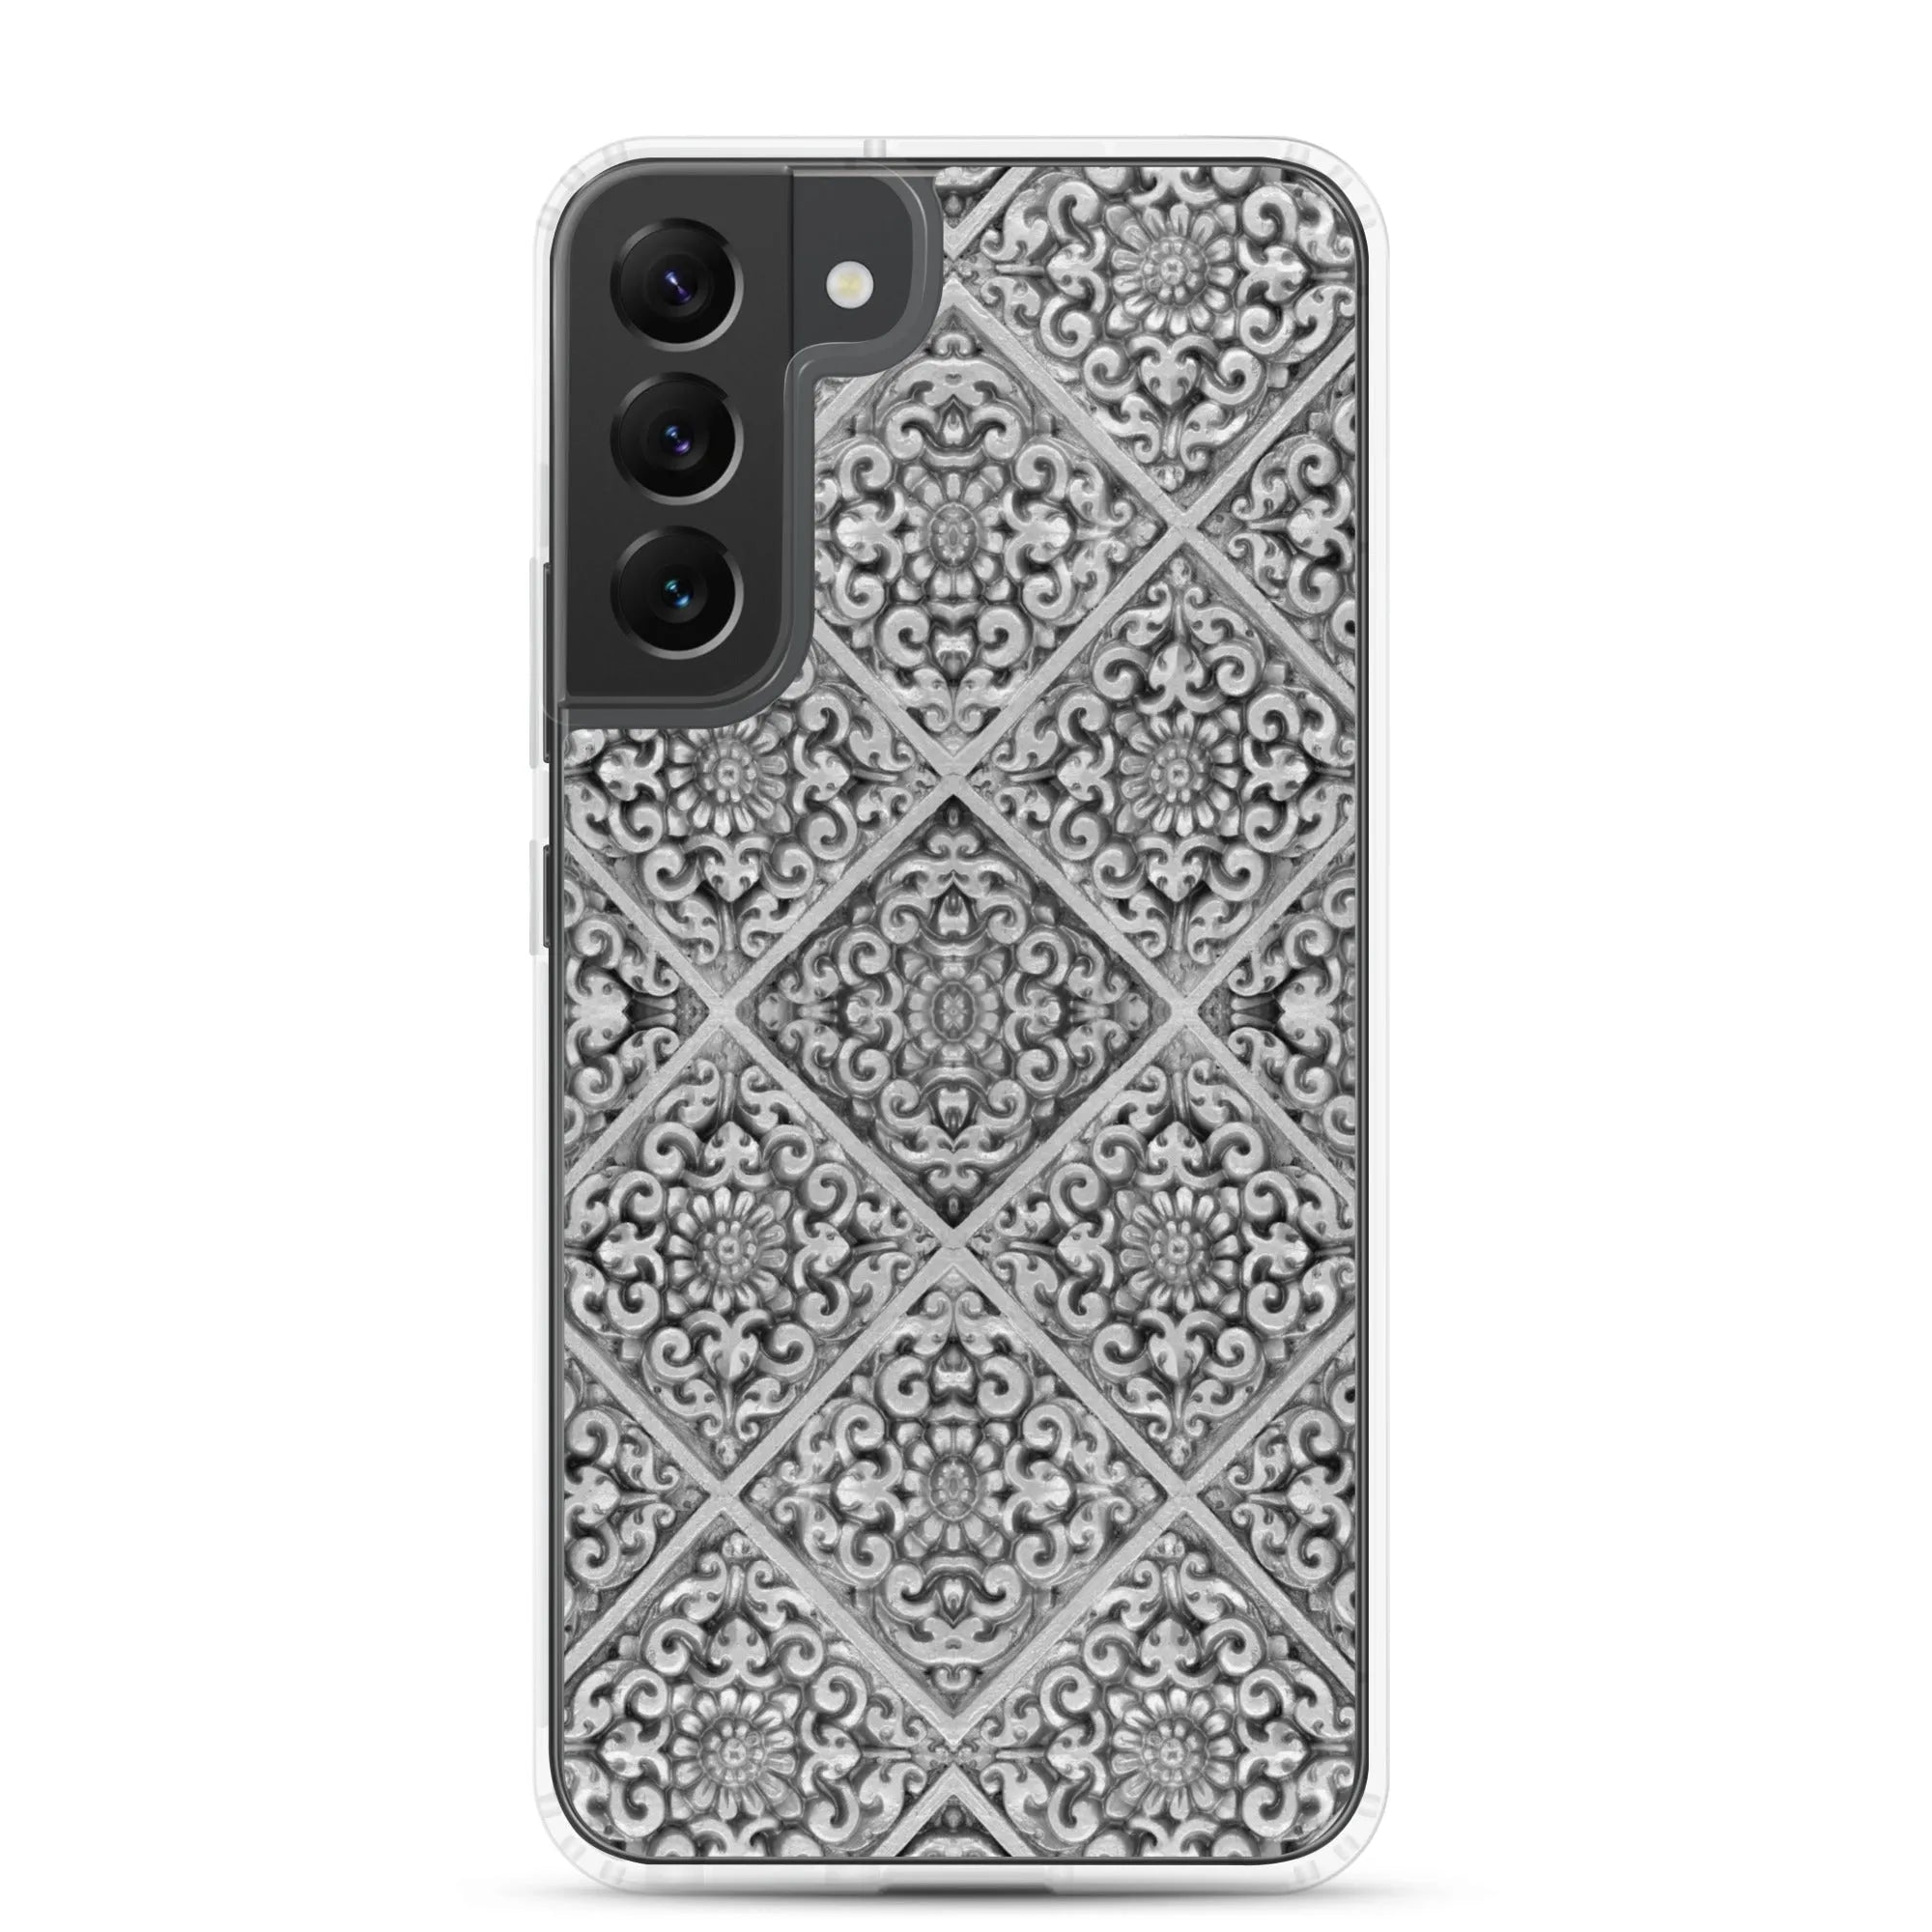 Flower Maze Samsung Galaxy Case - Black And White - Samsung Galaxy S22 Plus - Mobile Phone Cases - Aesthetic Art